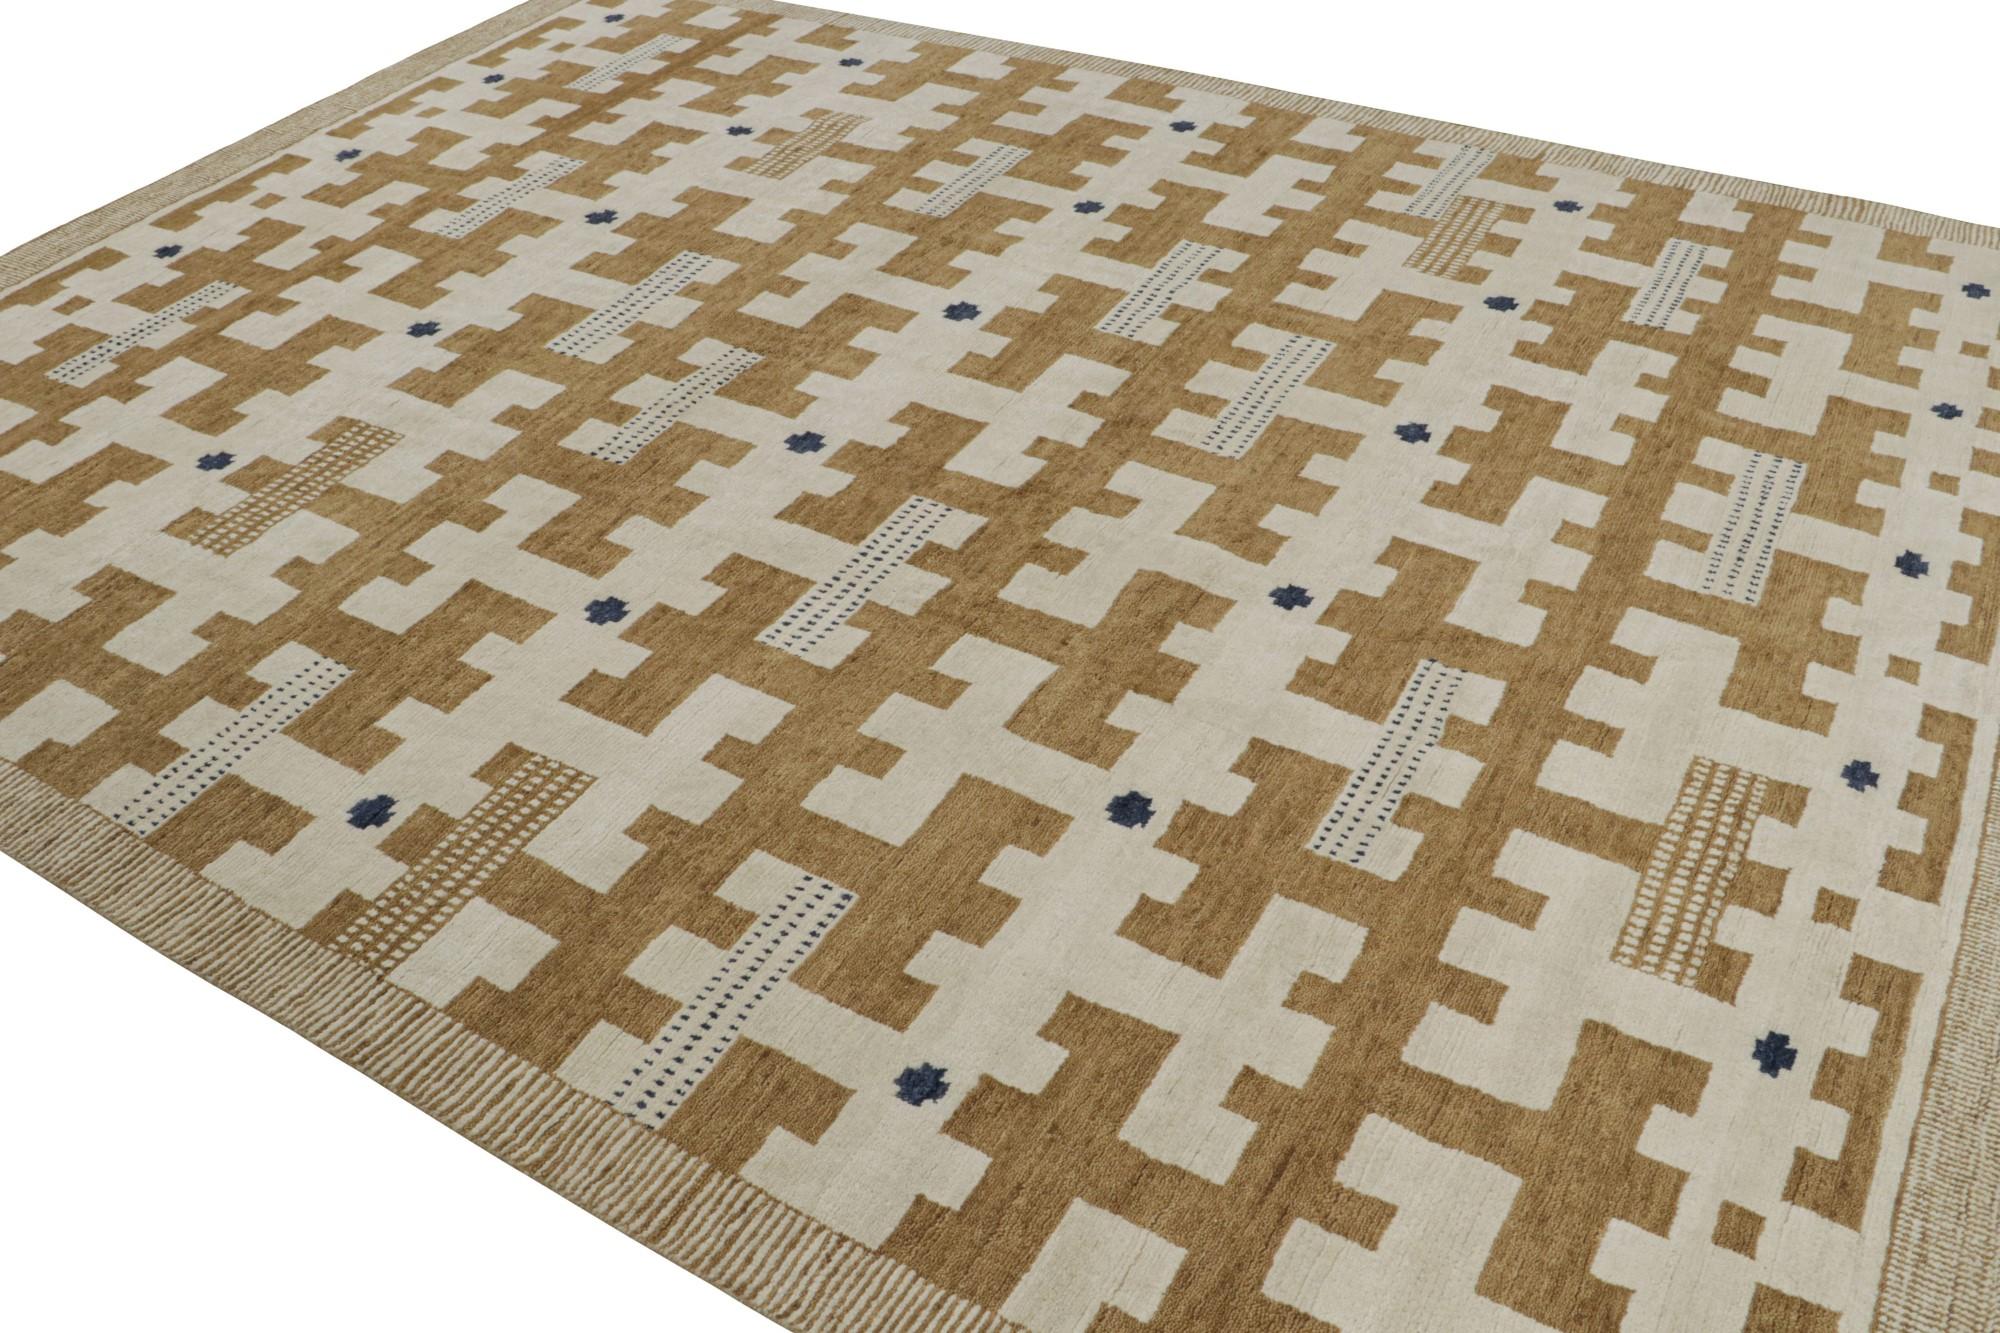 This rug design represents the Scandinavian Collection by Rug & Kilim—a modern take on the Swedish Deco style of Rollakan and Rya rugs. 

On the Design:

These photos represent a 9x12 rug in this design, hand-knotted in wool and bamboo silk with